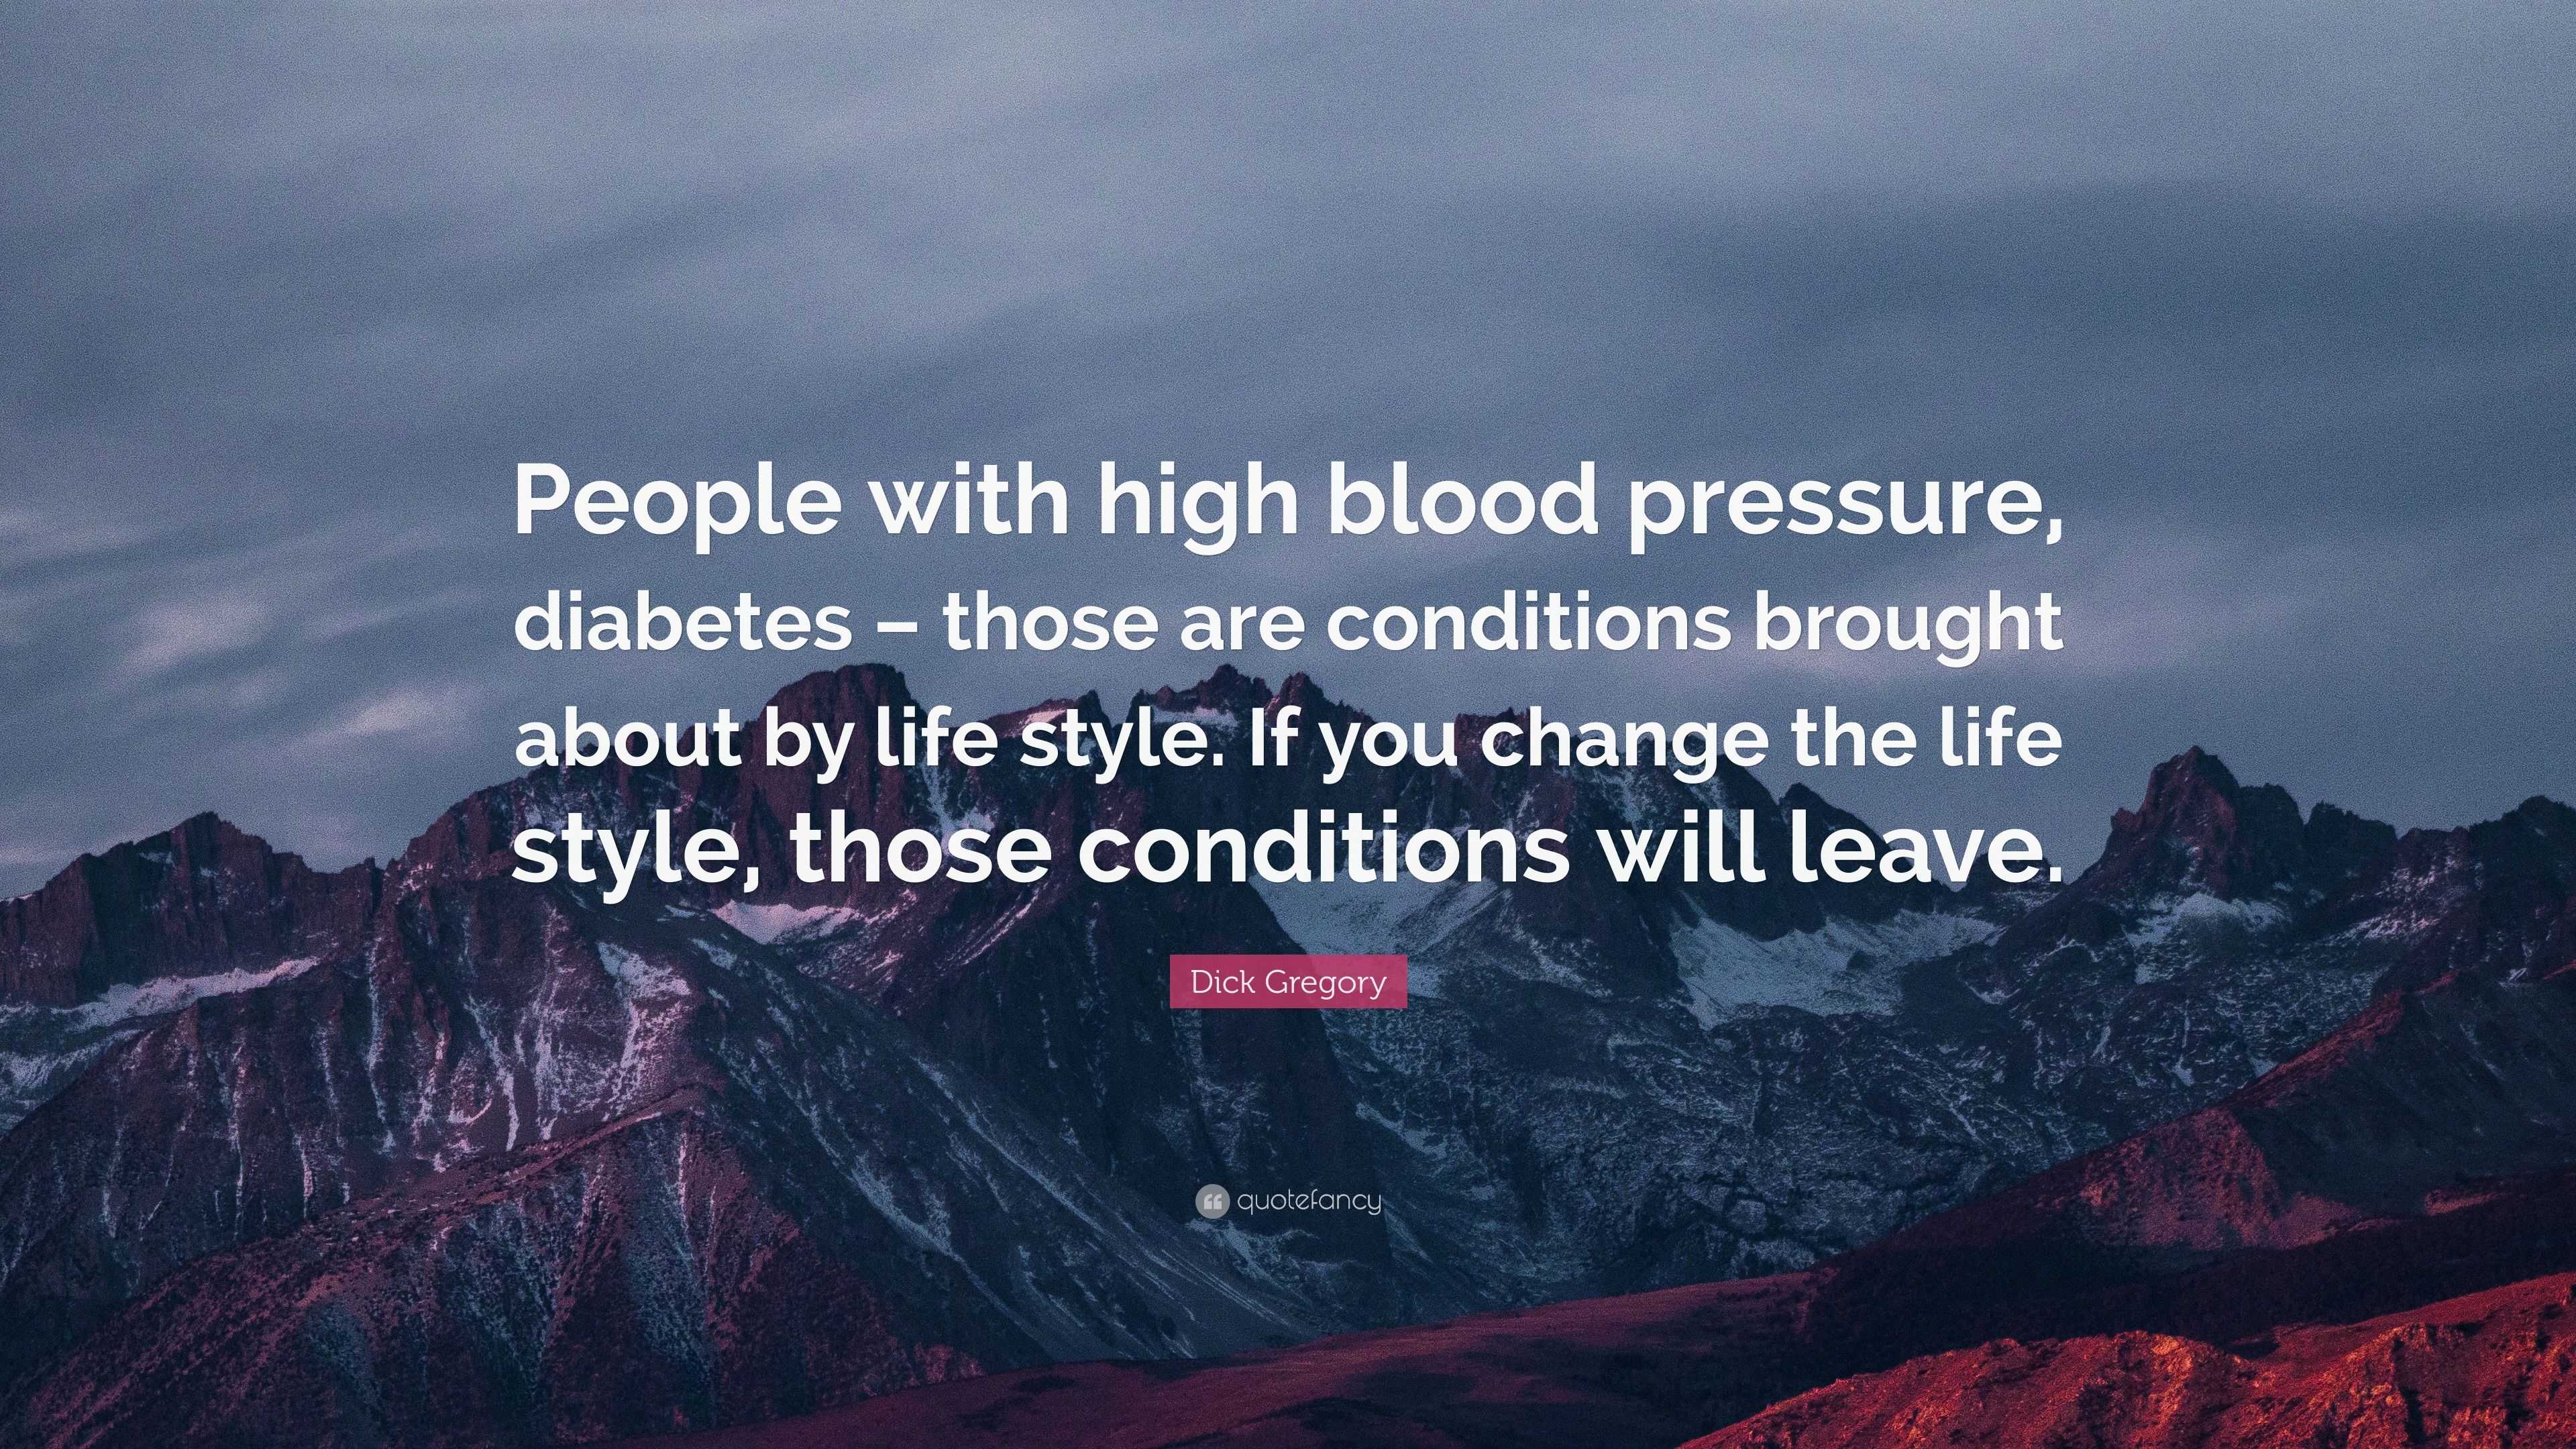 https://quotefancy.com/media/wallpaper/3840x2160/4161158-Dick-Gregory-Quote-People-with-high-blood-pressure-diabetes-those.jpg